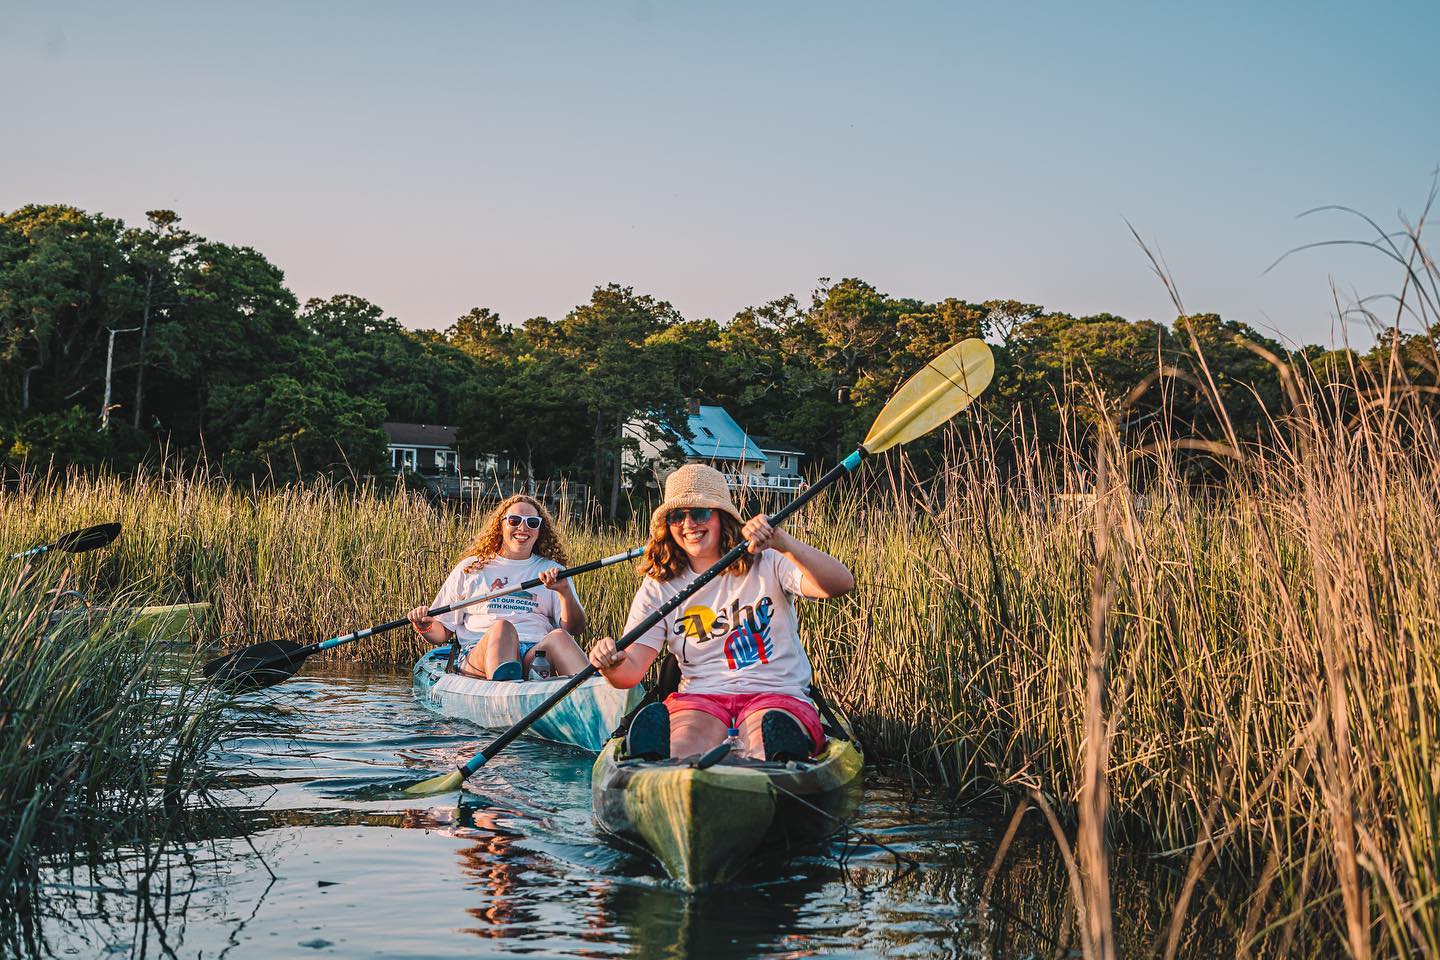 Two-hour Kayaking in North Myrtle Beach